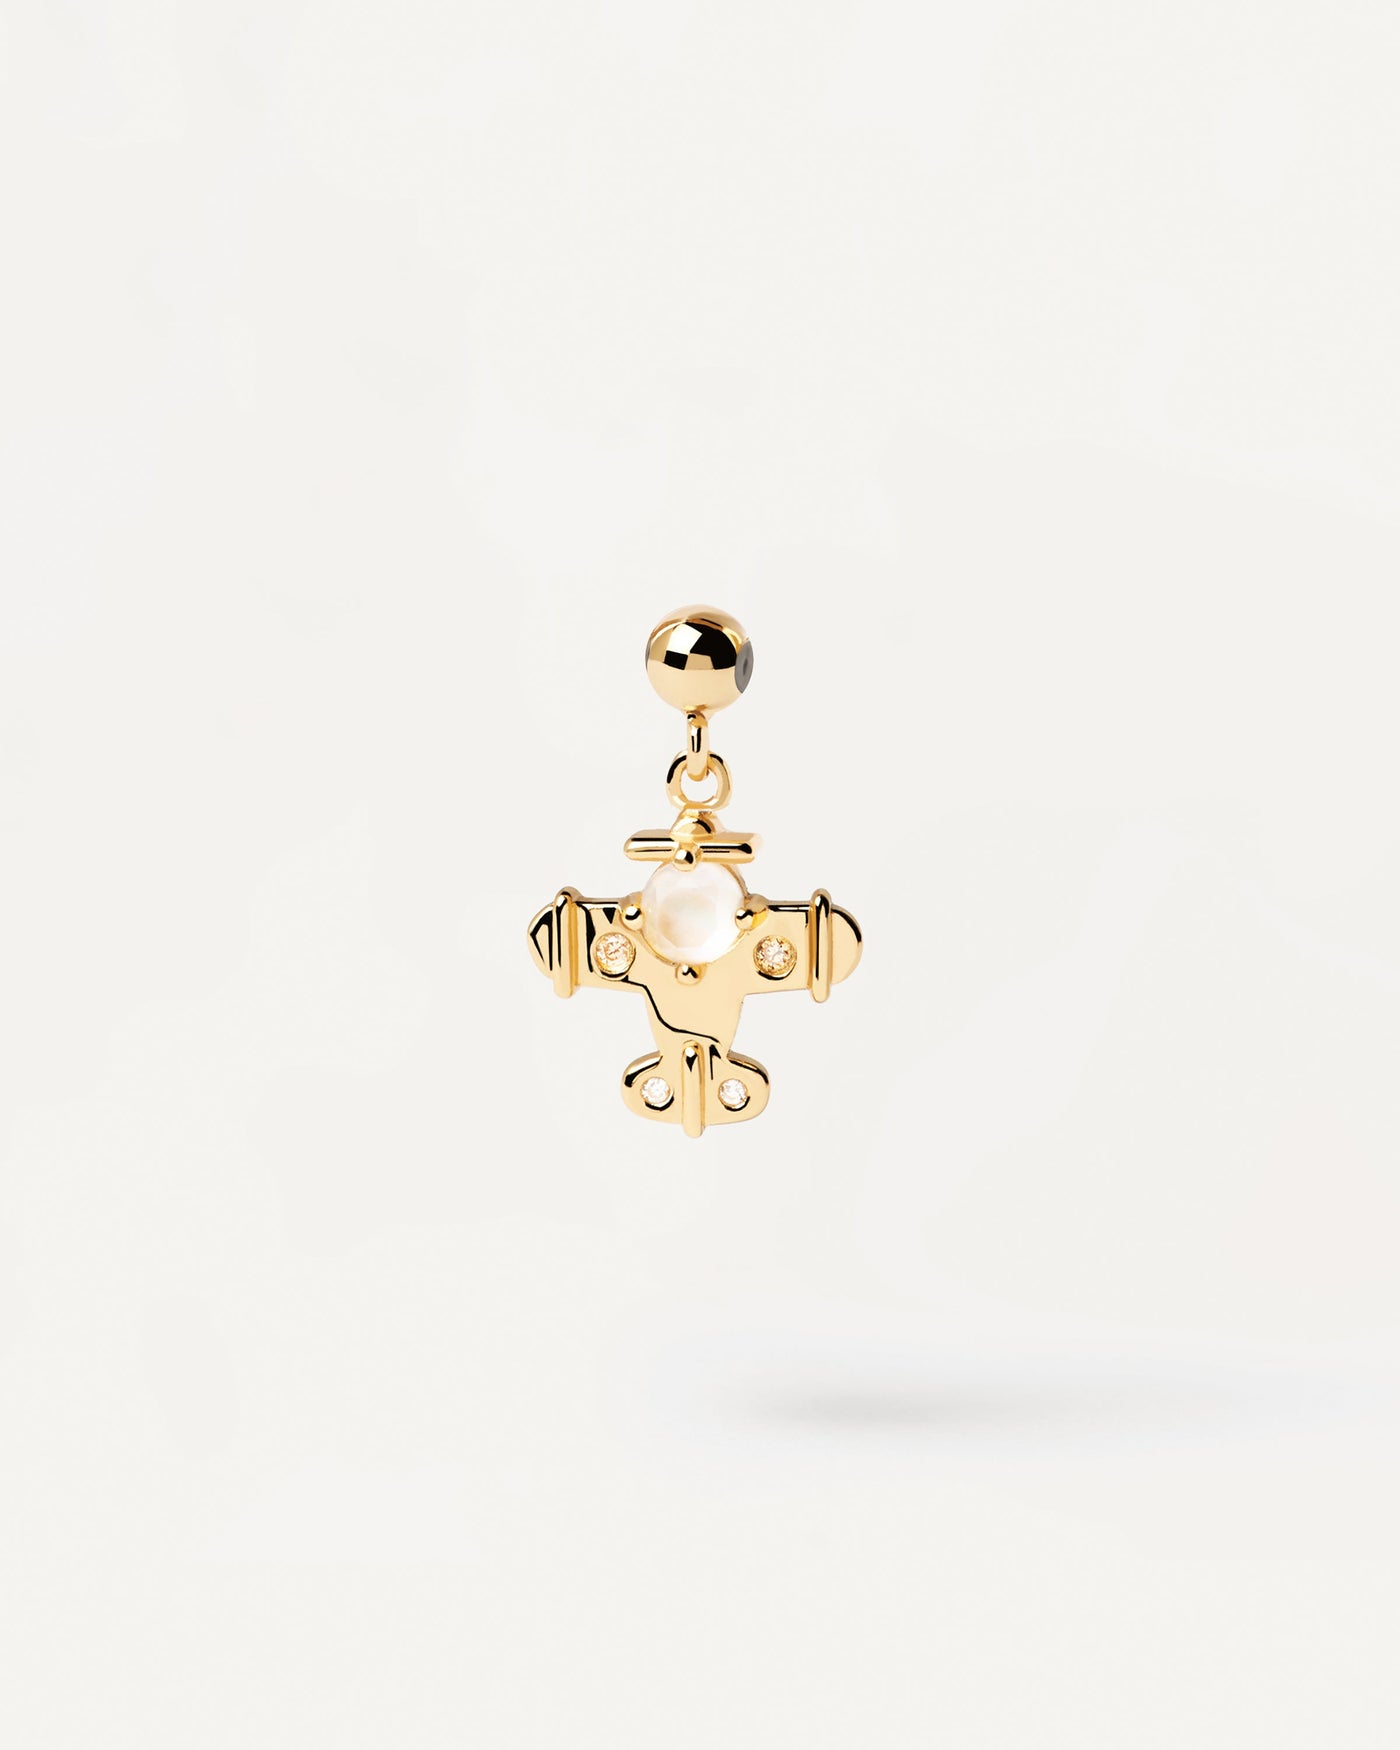 2023 Selection | Plane Charm. Gold-plated silver airplane pendant for Charm necklace or bracelet with white zirconia. Get the latest arrival from PDPAOLA. Place your order safely and get this Best Seller. Free Shipping.